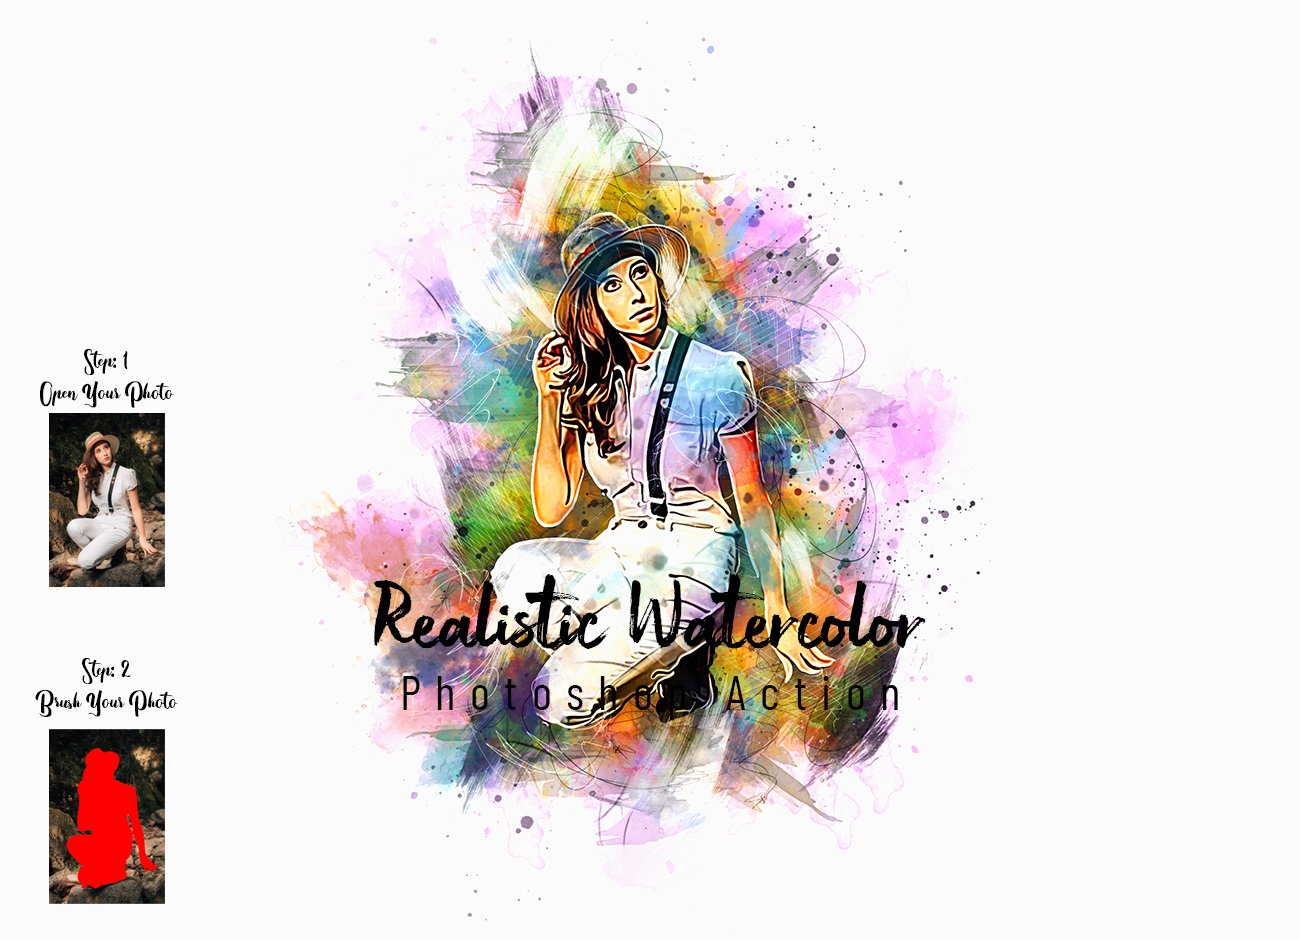 Realistic Watercolor Photoshop Actiocover image.